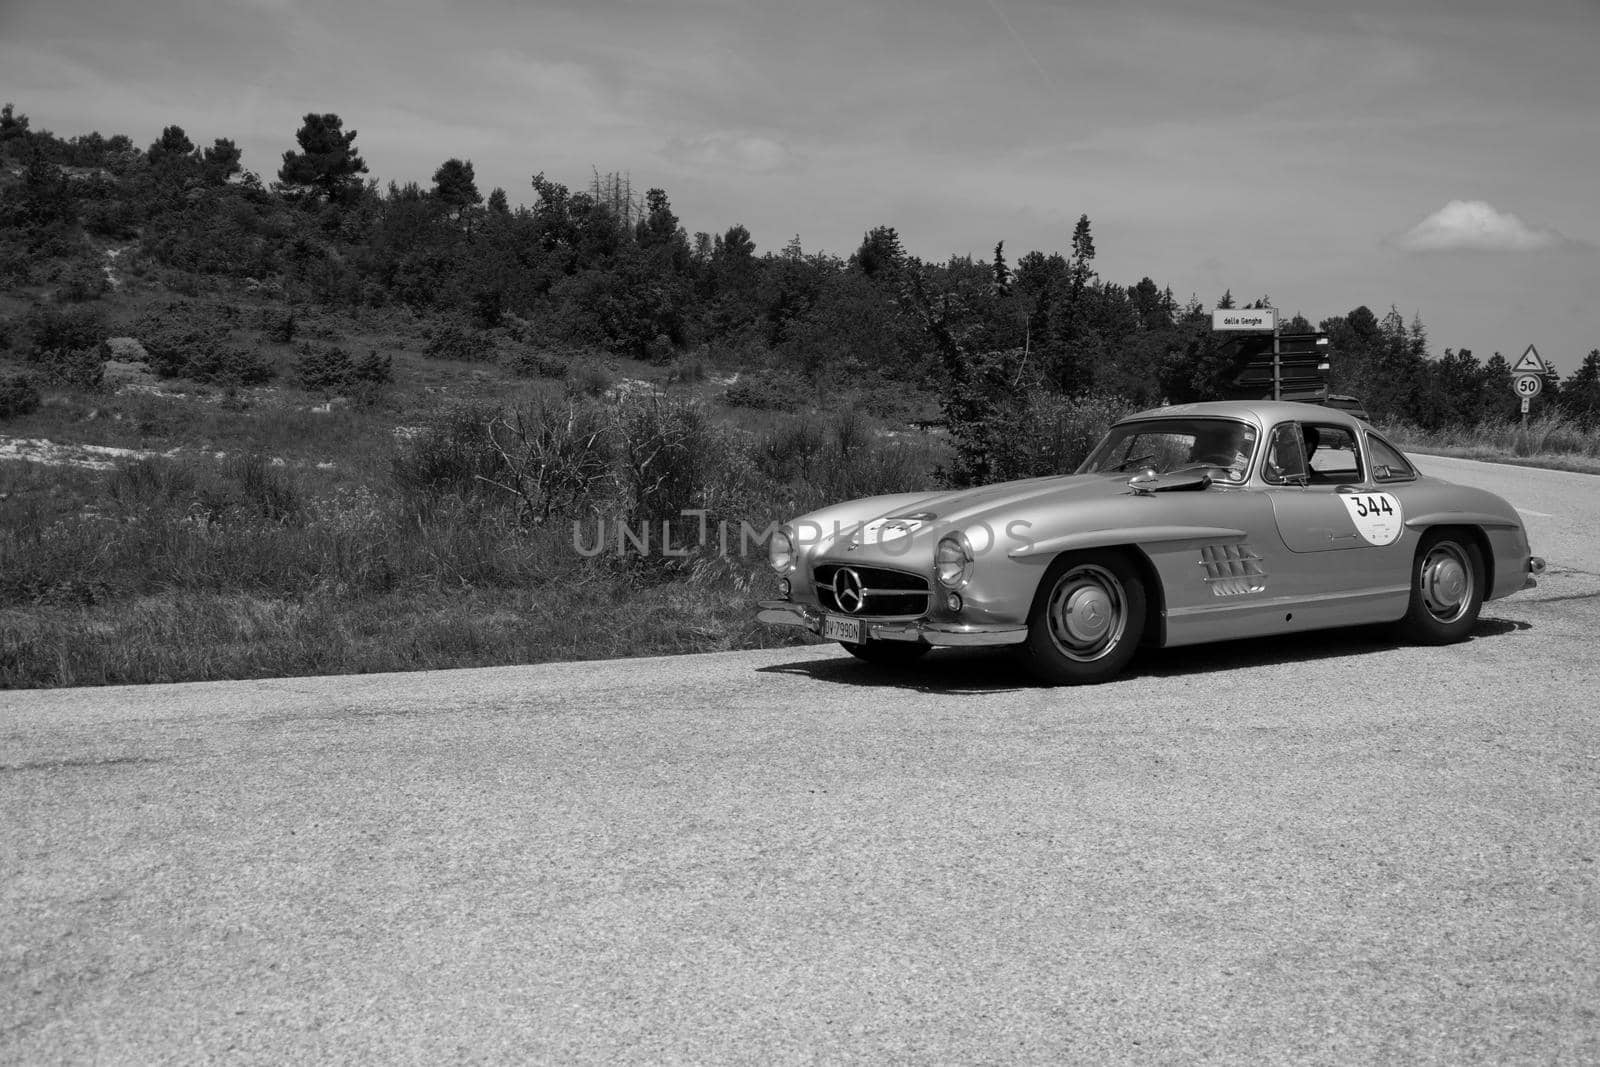 URBINO - ITALY - JUN 16 - 2022 : MERCEDES-BENZ 300 SL (W198) 1954 on an old racing car in rally Mille Miglia 2022 the famous italian historical race (1927-1957